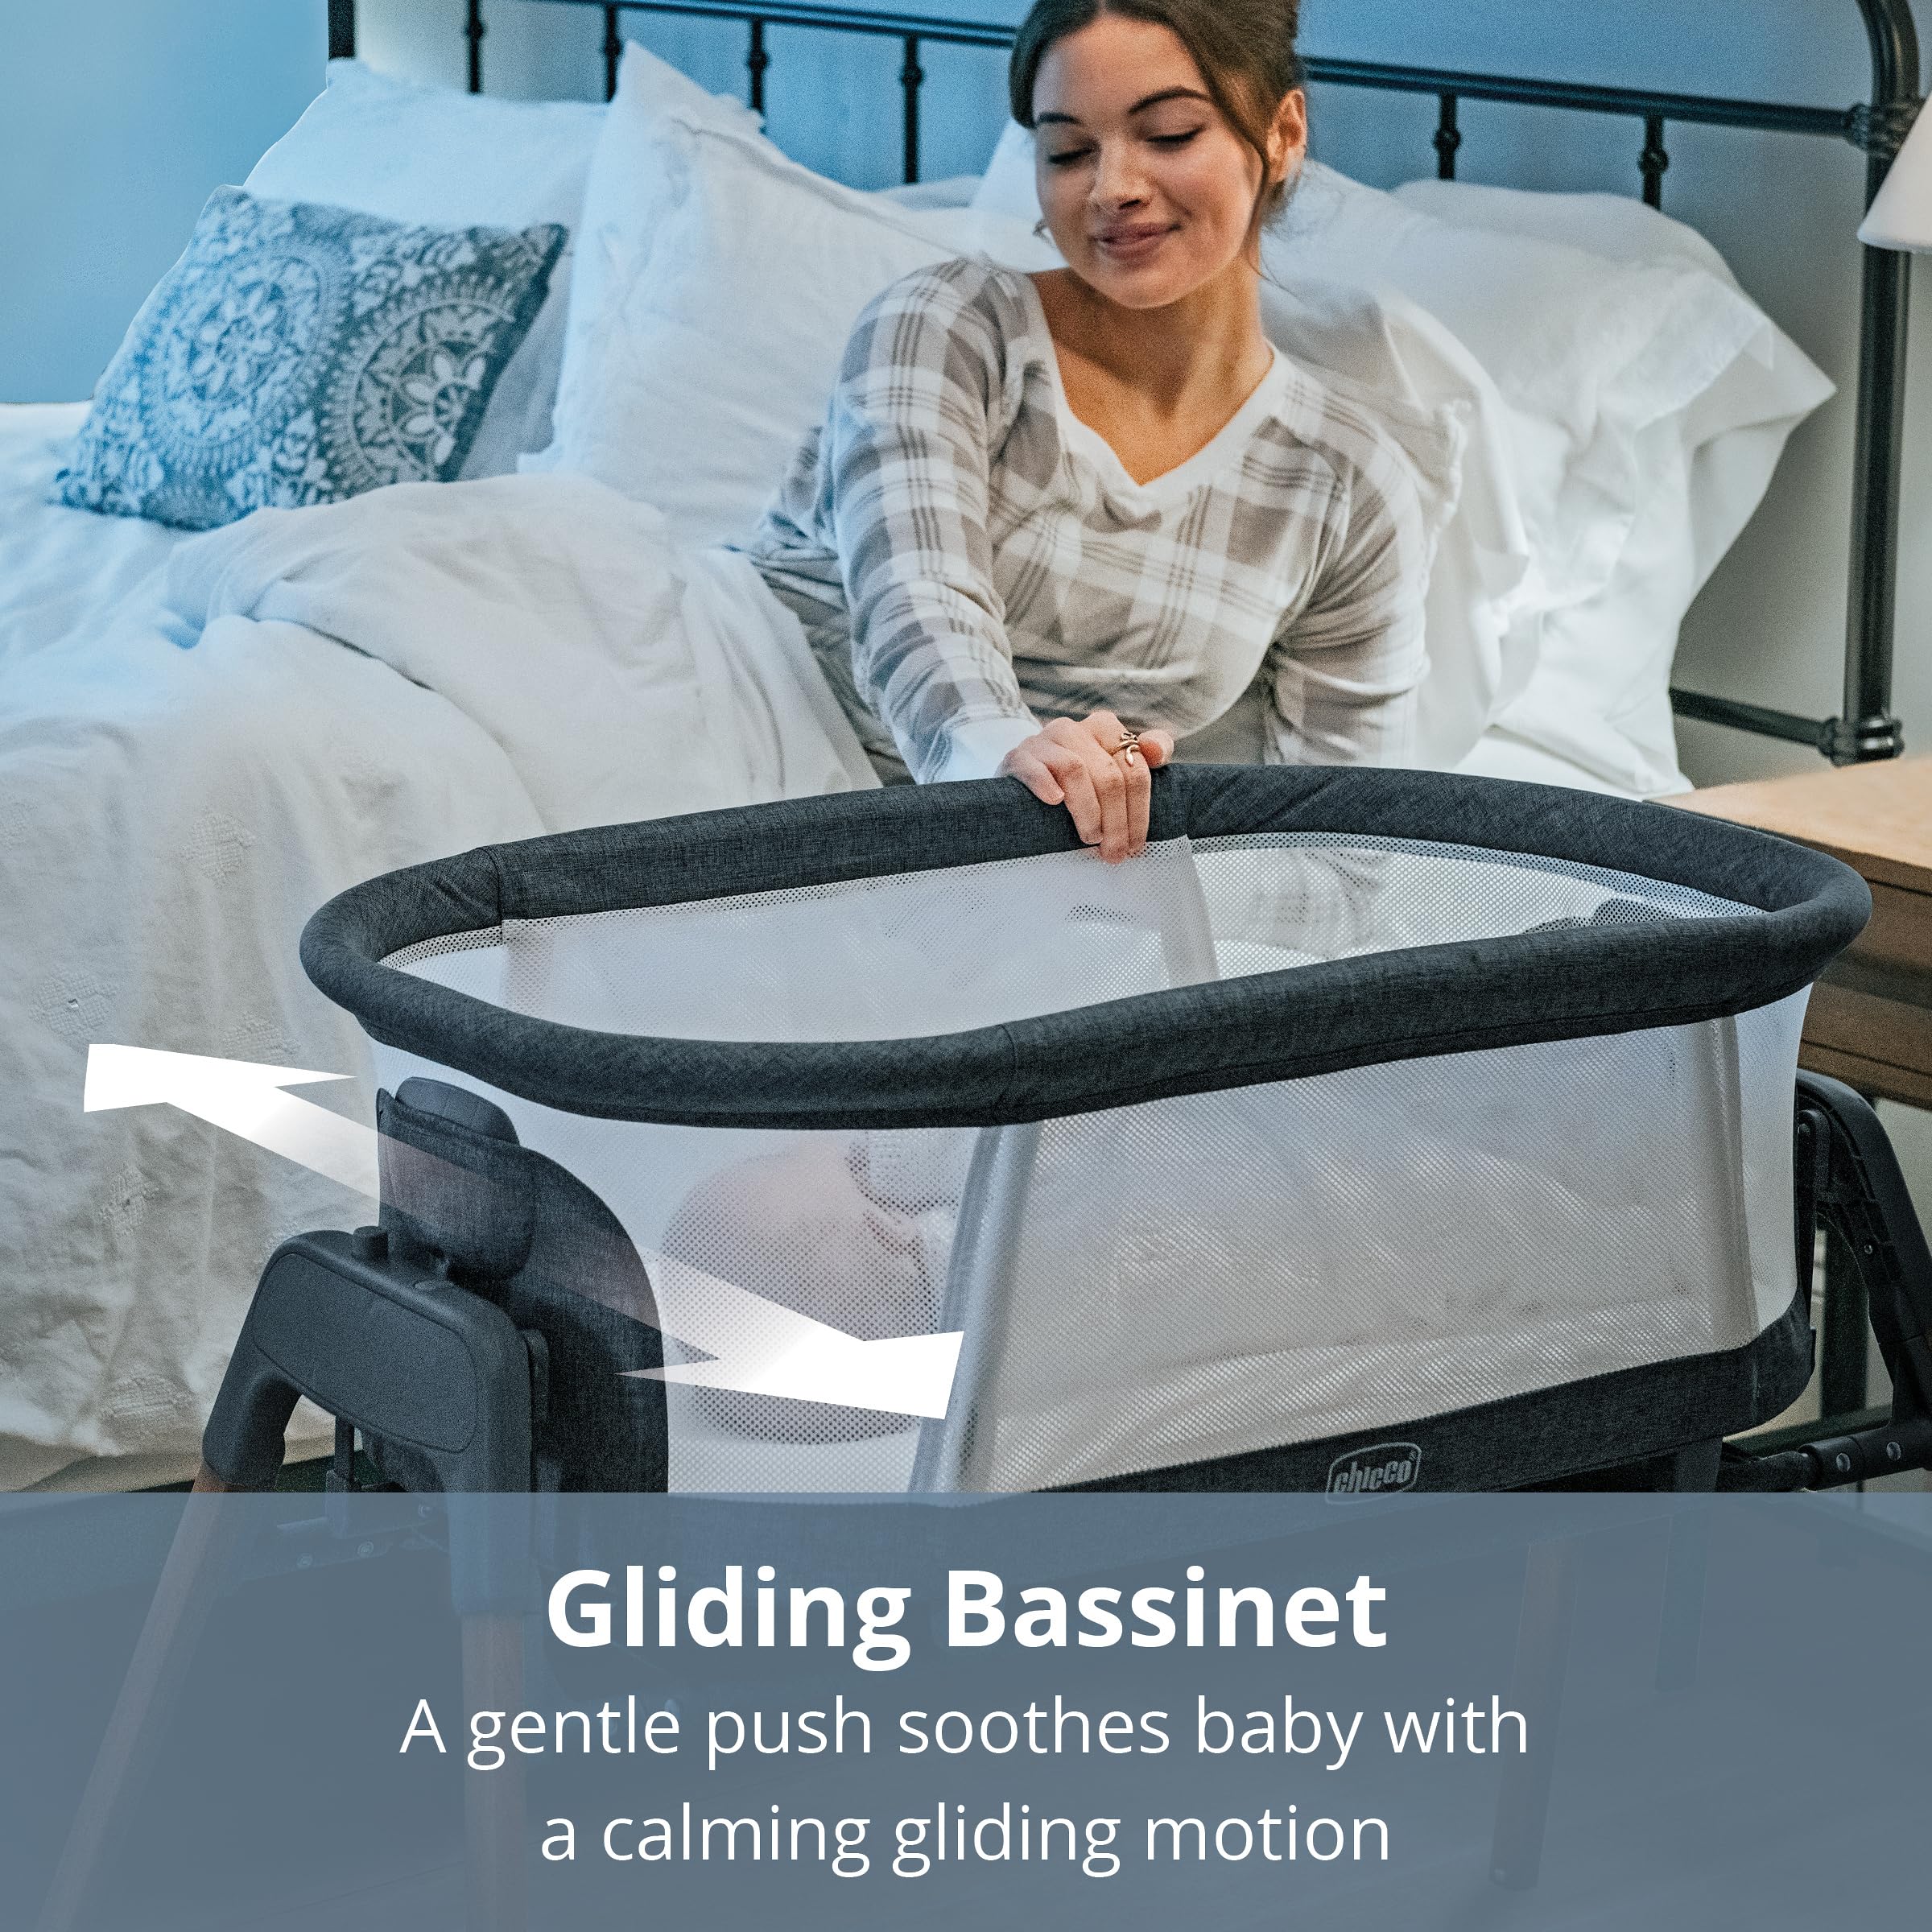 Chicco LullaGlide™ 3-in-1 Stationary Baby Bassinet, Gliding Bassinet and Portable Bassinet, Waterproof Mattress and Fitted Sheet, Travel Bassinet for Baby Includes Carry Bag | Luna/Grey